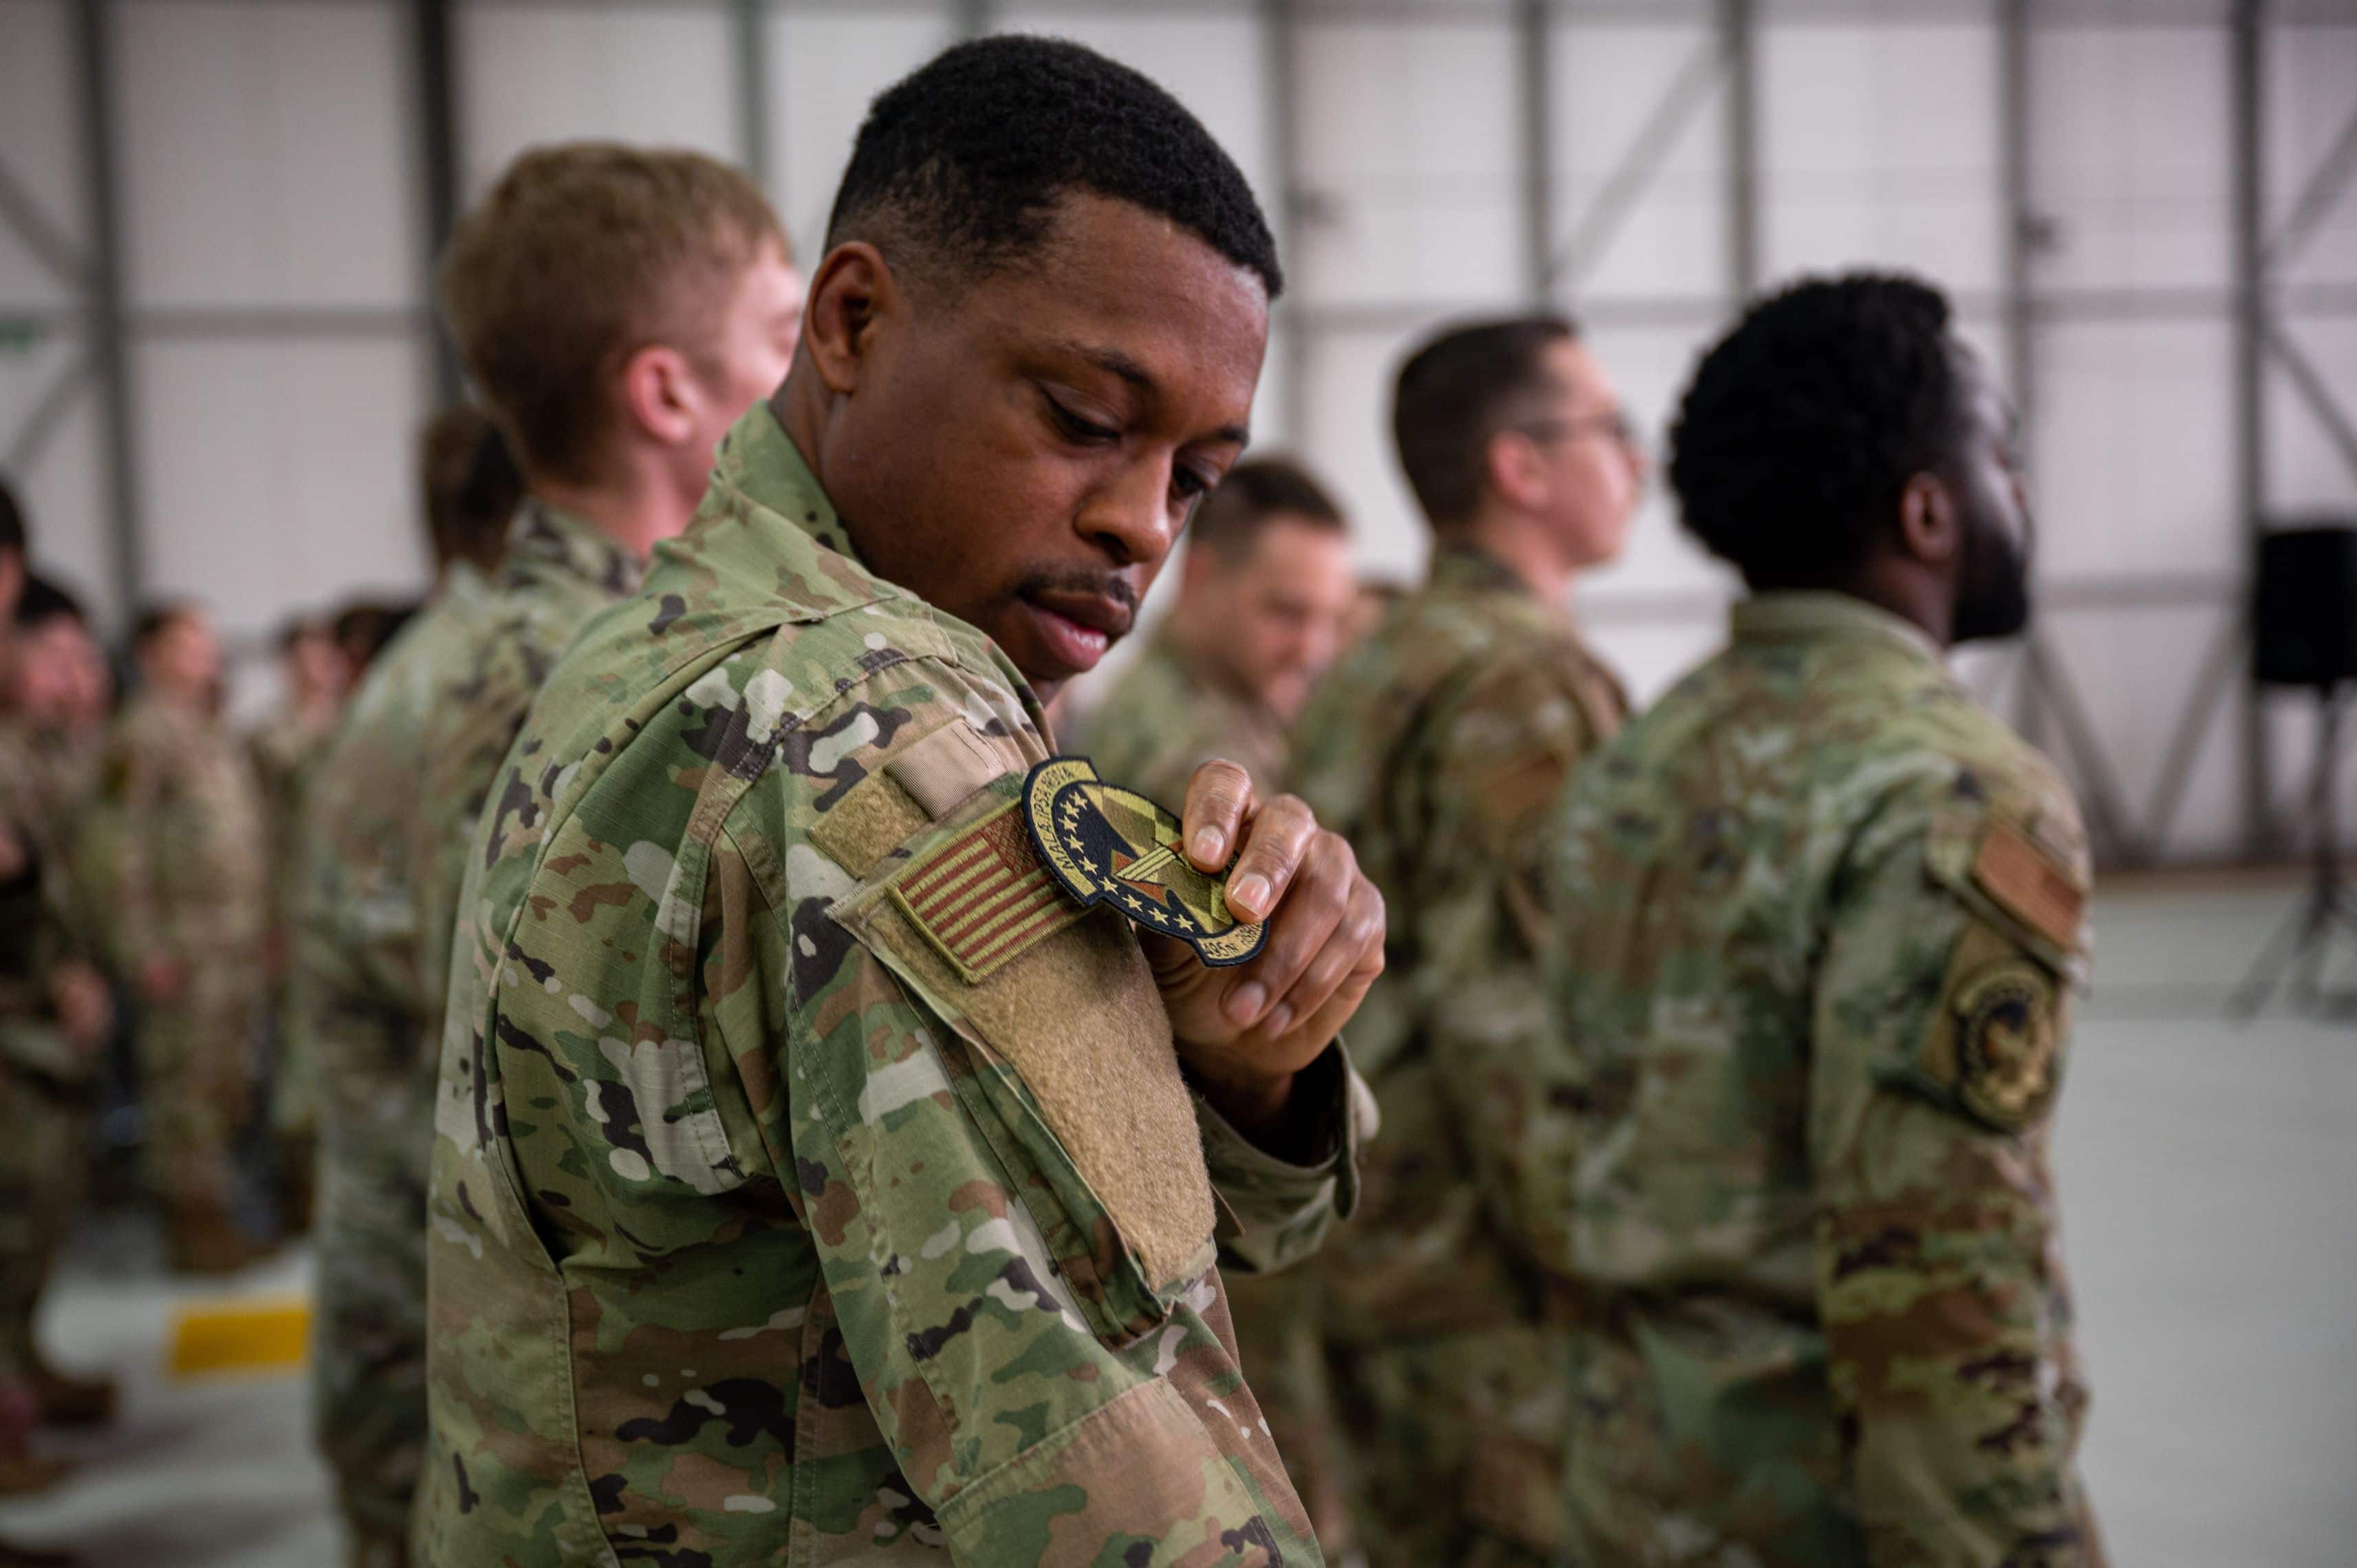 U.S. Air Force Omari Miller, 495th Fighter Generation Squadron F-35 avionics technician, replaces his 748th Aircraft Maintenance Squadron patch with the 495th Fighter Generation Squadron patch, signifying the deactivation and activation of the squadrons at RAF Lakenheath, England, June 9, 2023.